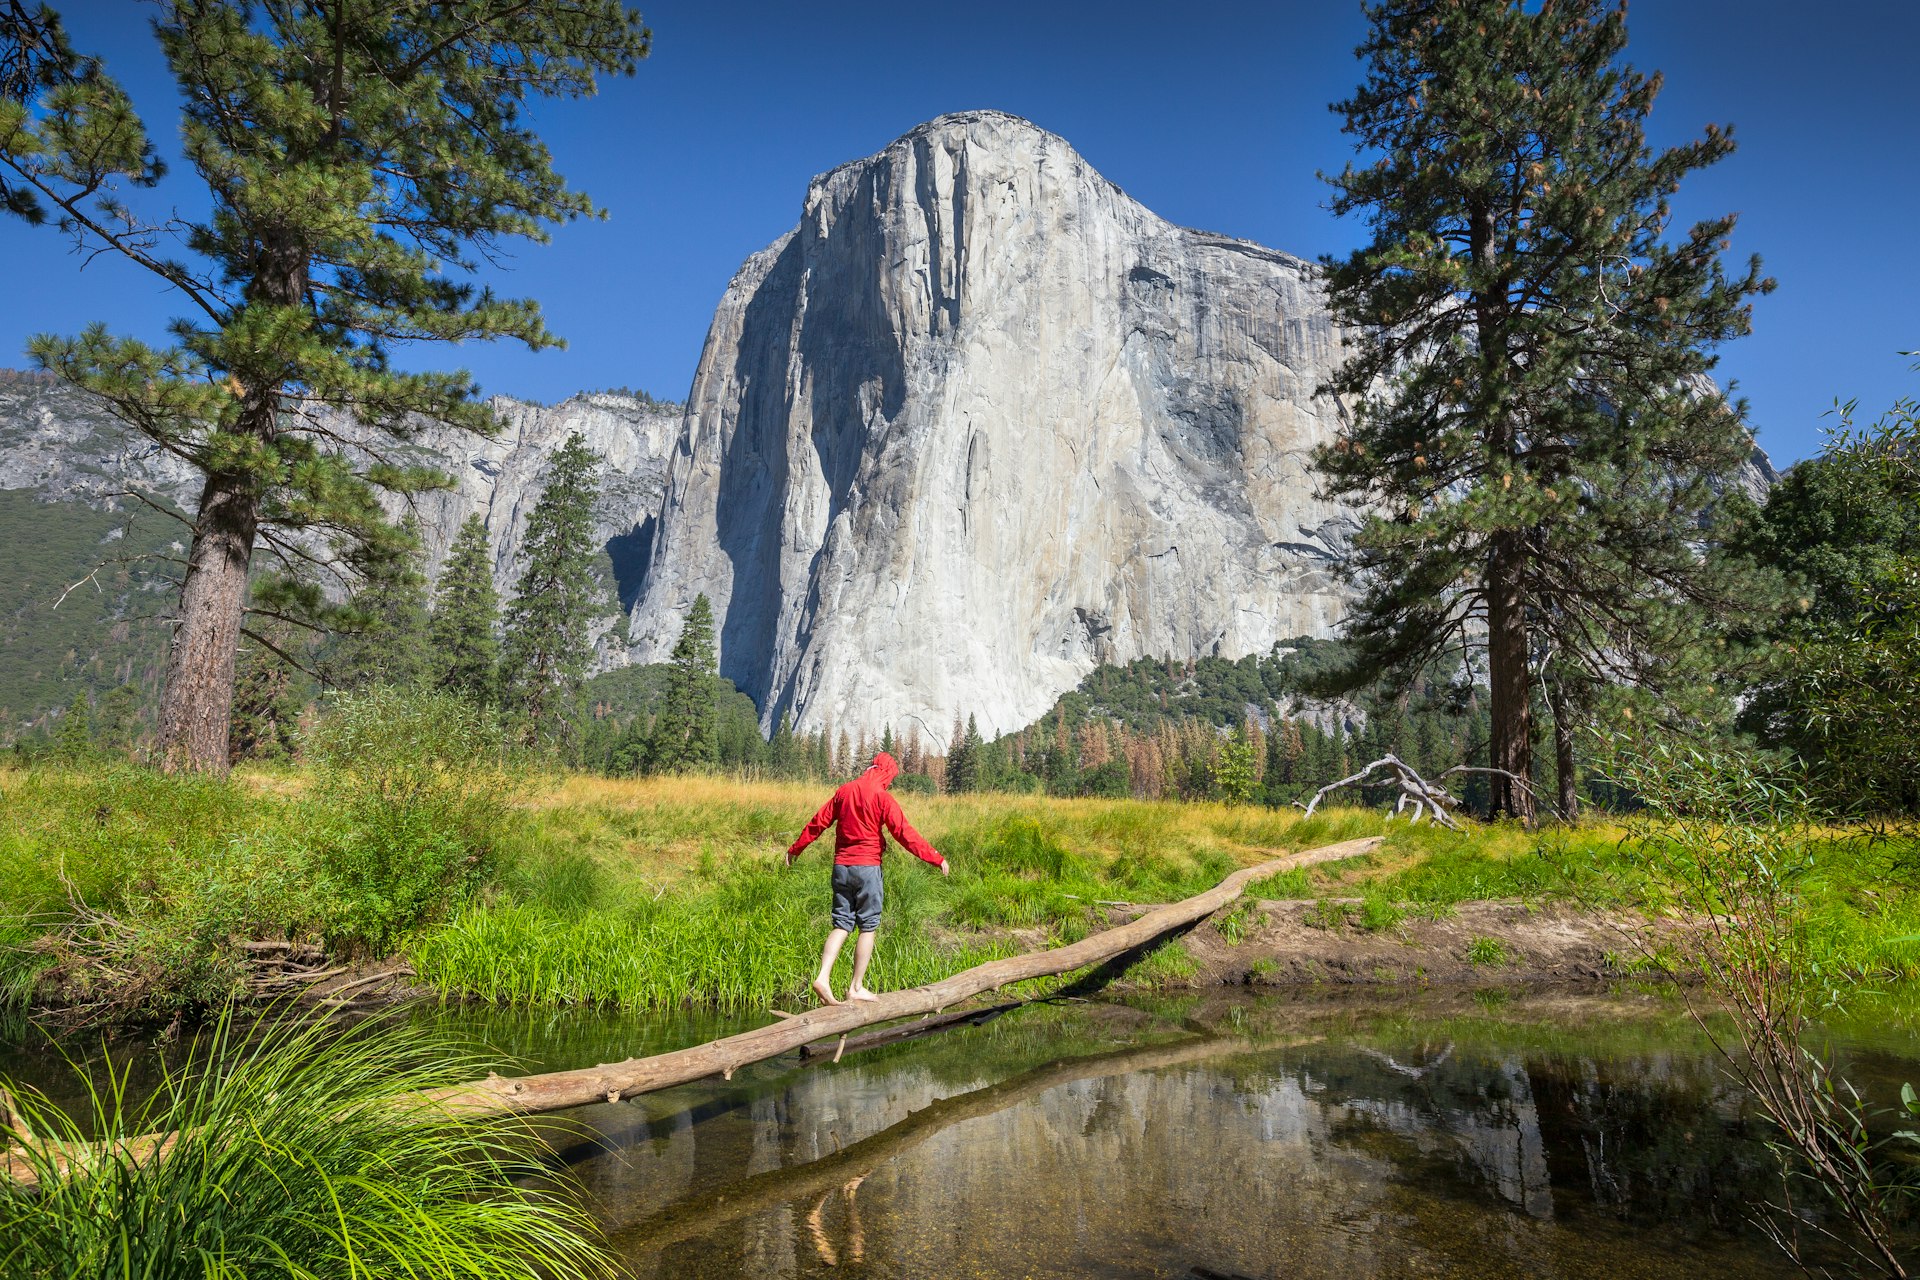 A hiker is balancing on a fallen tree over a tributary of Merced river in front of famous El Capitan rock climbing summit in scenic Yosemite Valley, Yosemite National Park, Mariposa County, California